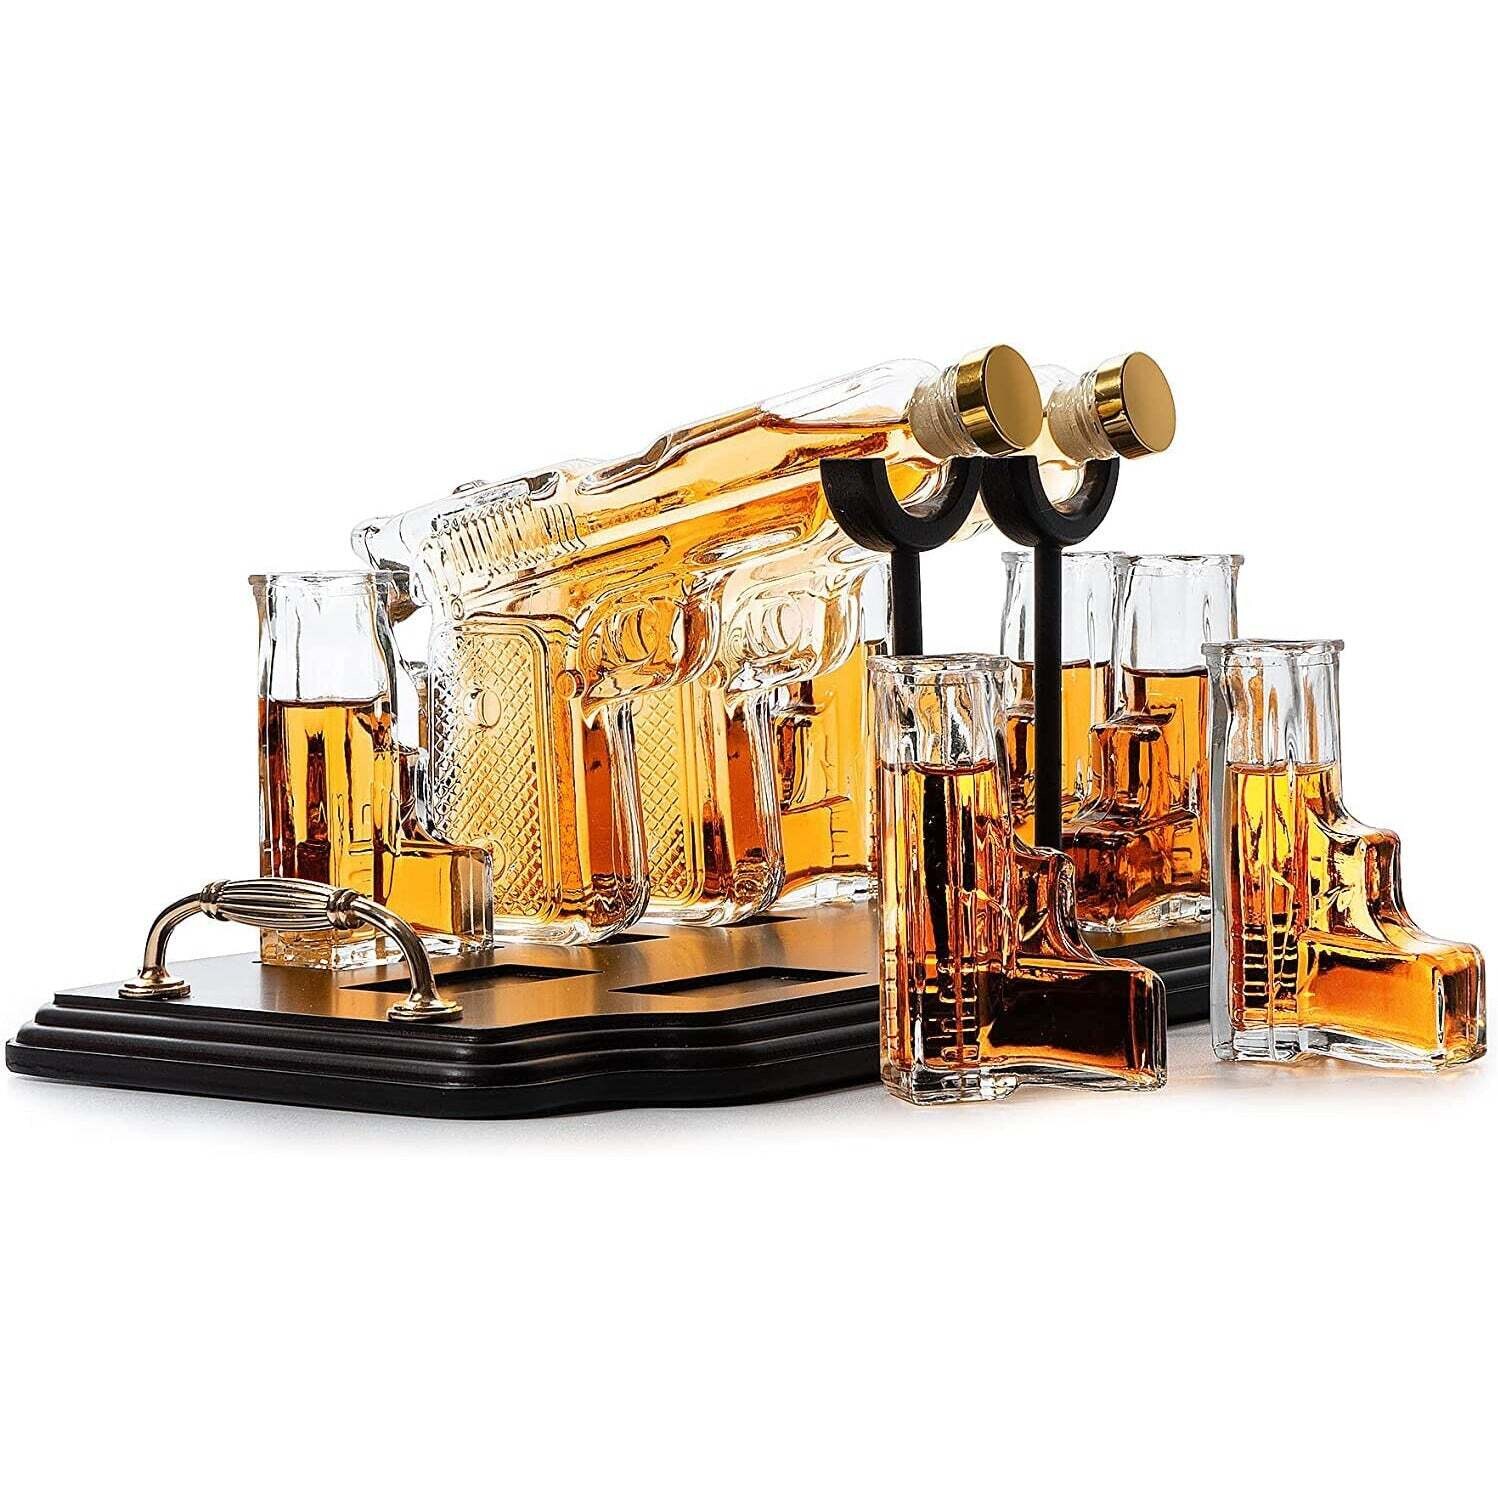 Pistol 2 Whiskey Decanters 300ml with 6 3oz Pistol Shot Glasses and Tray with Handles Veteran Gifts, Military Gifts, Home Bar Gifts, Law Enforcement Gifts, Drinking Accessories